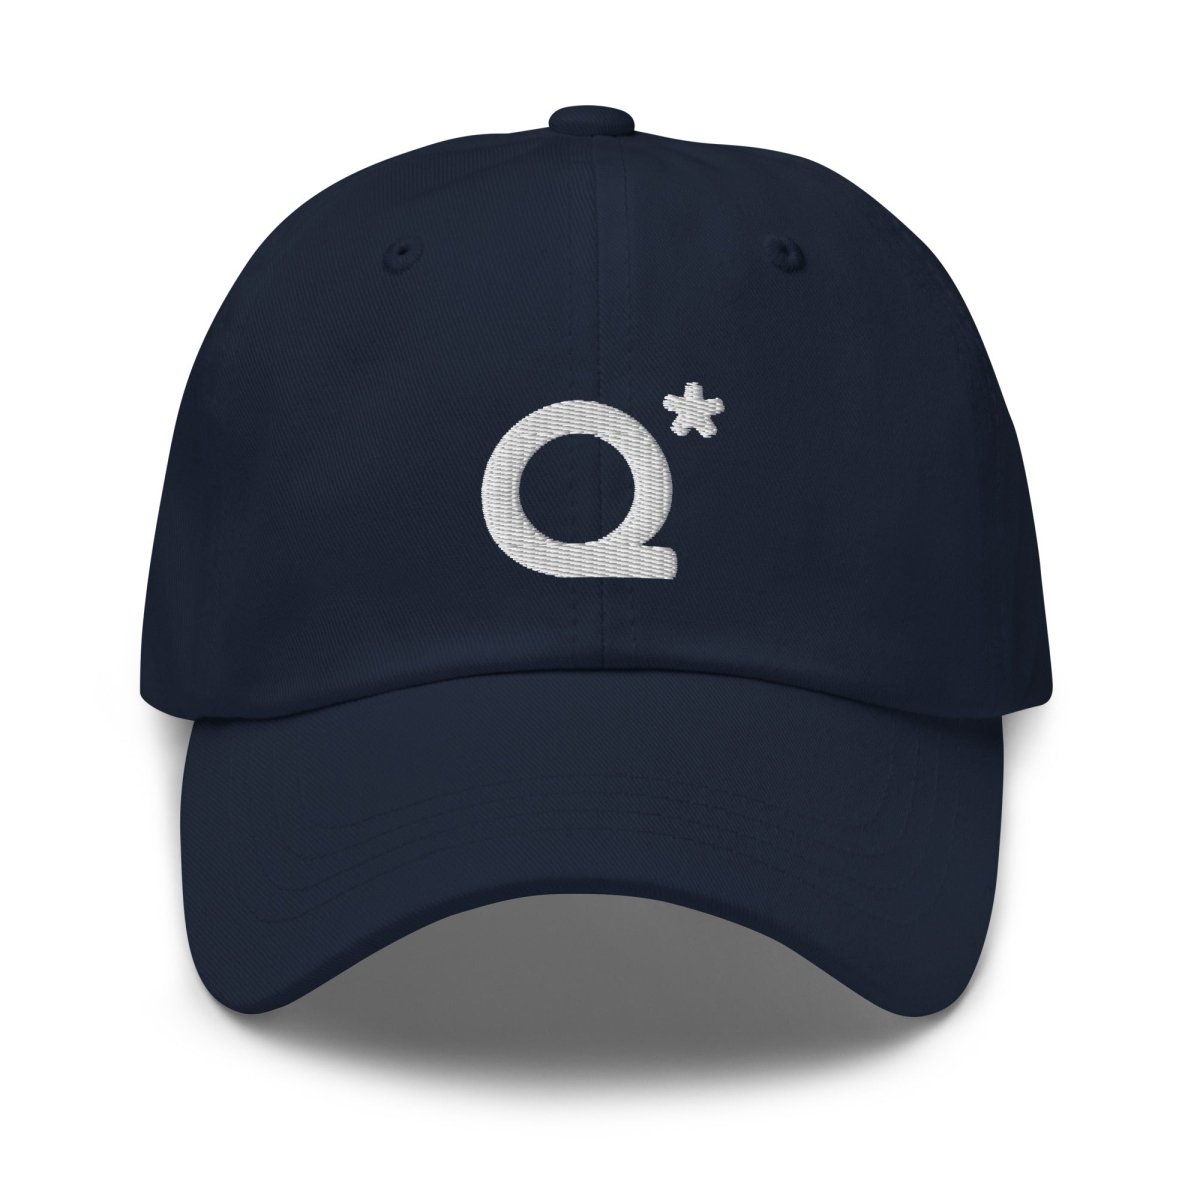 Q* (Q - Star) Embroidered Cap 1 - Navy - AI Store